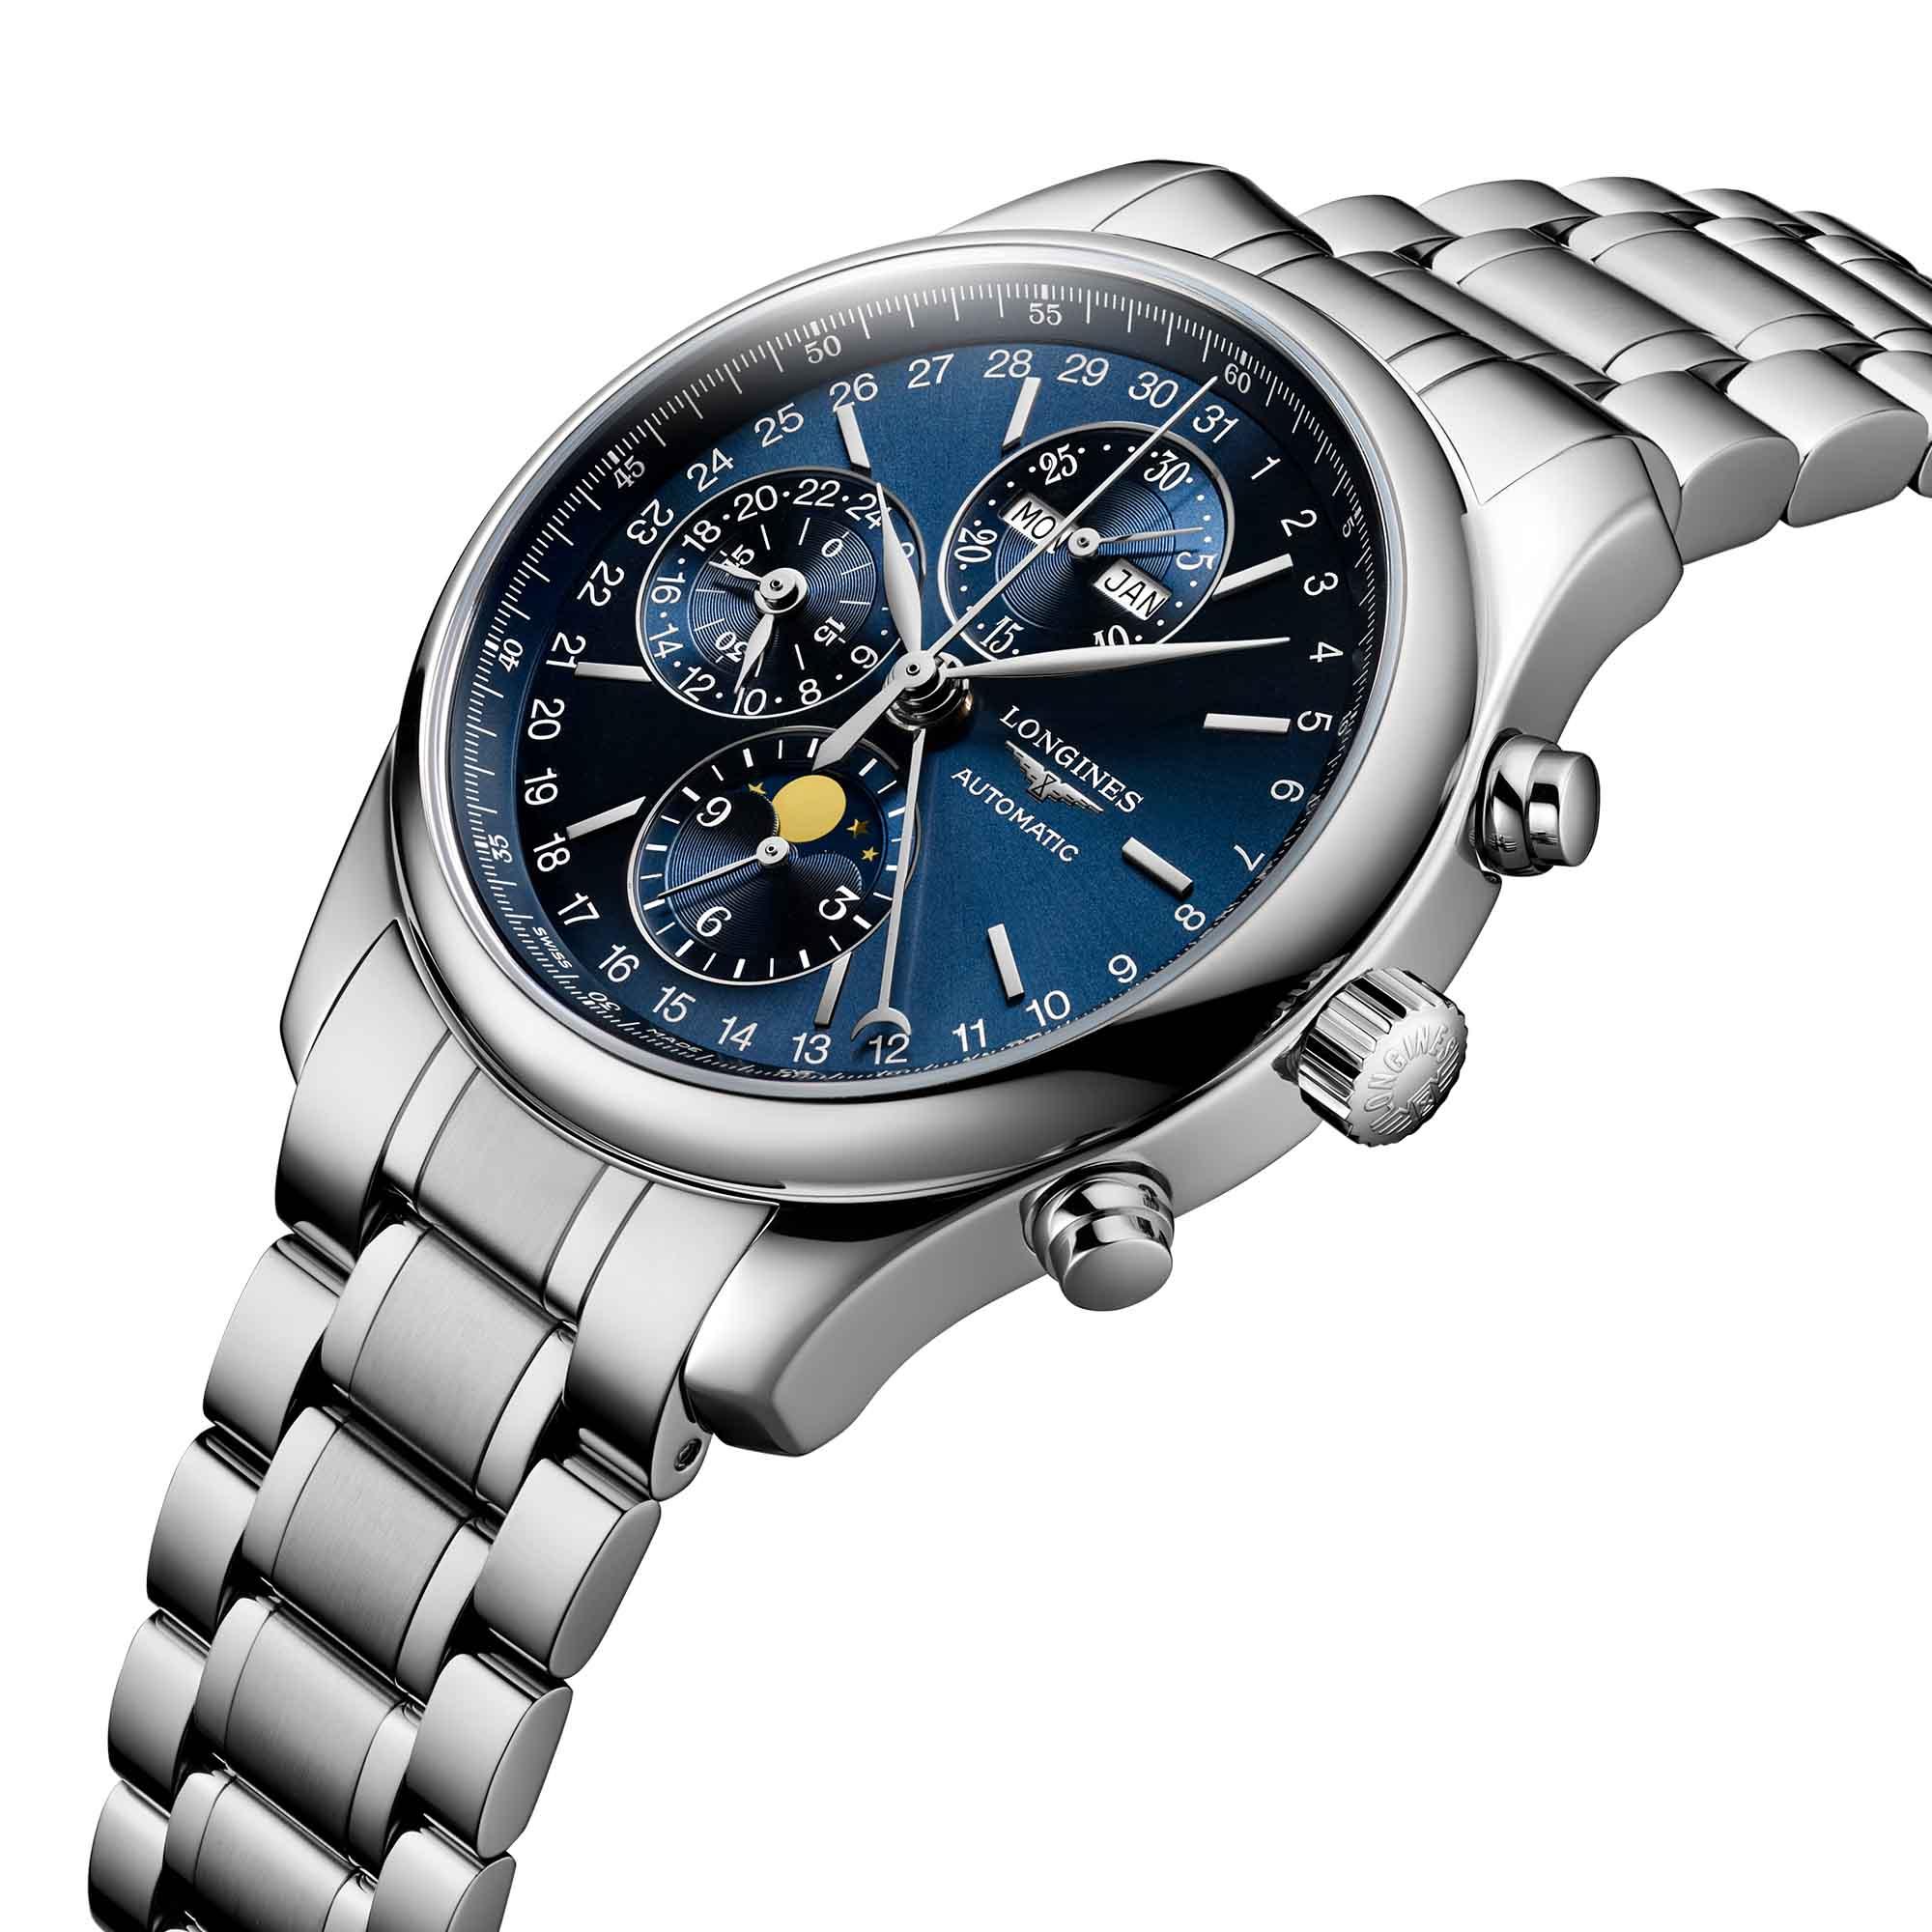 Longines The Longines Master Collection (Ref: L2.773.4.92.6)